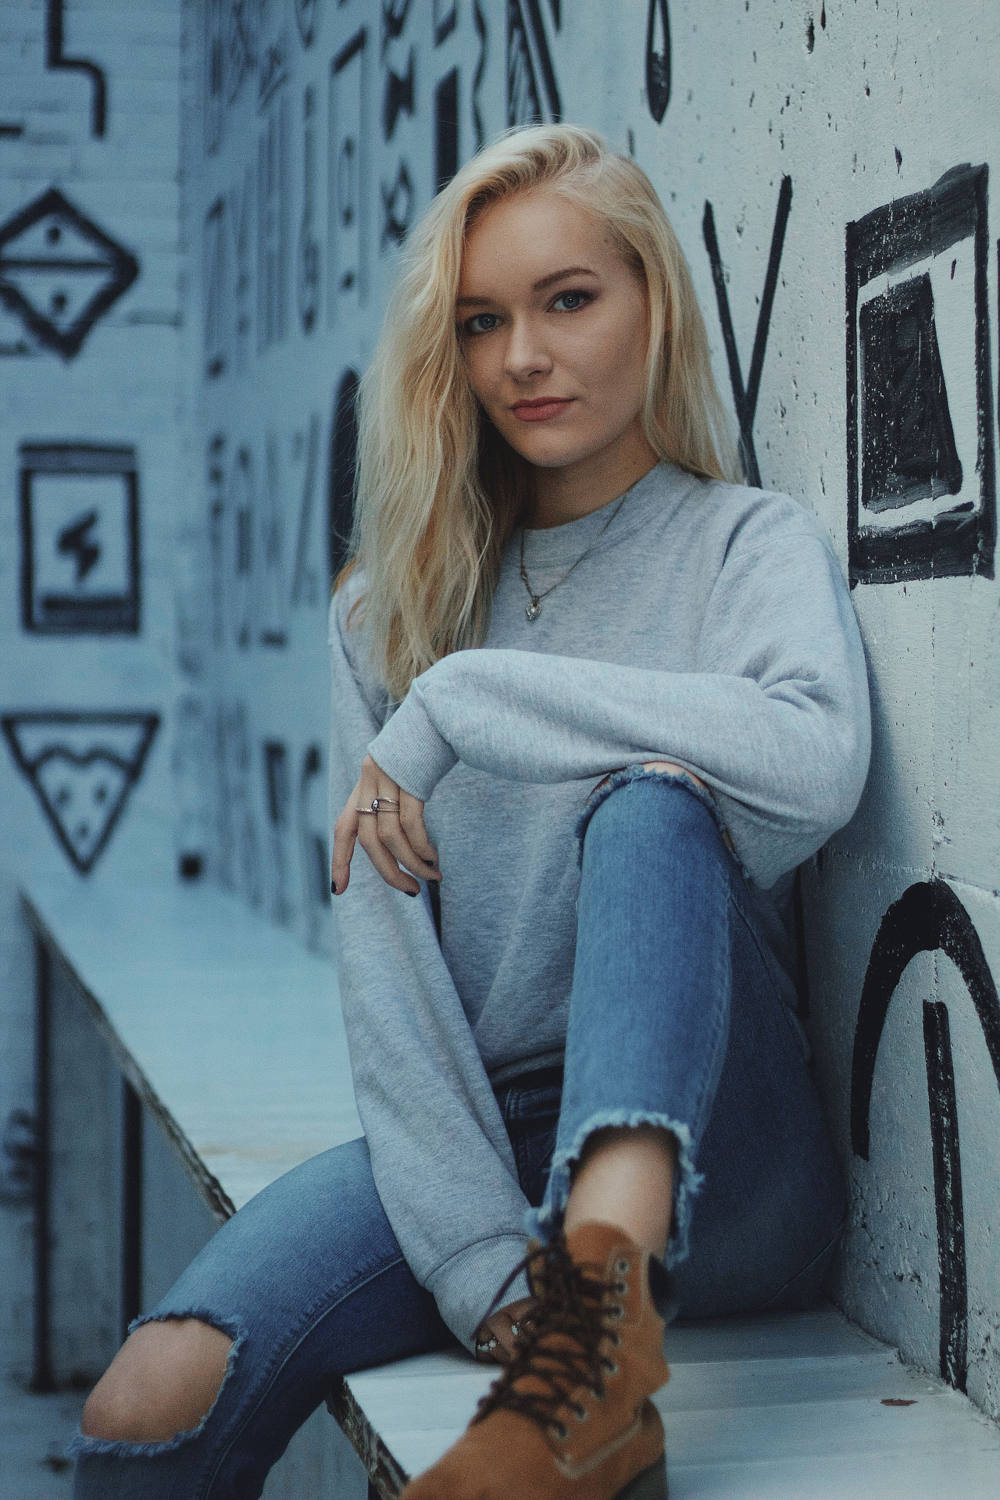 Young woman posing with a grey sweater and ripped jeans